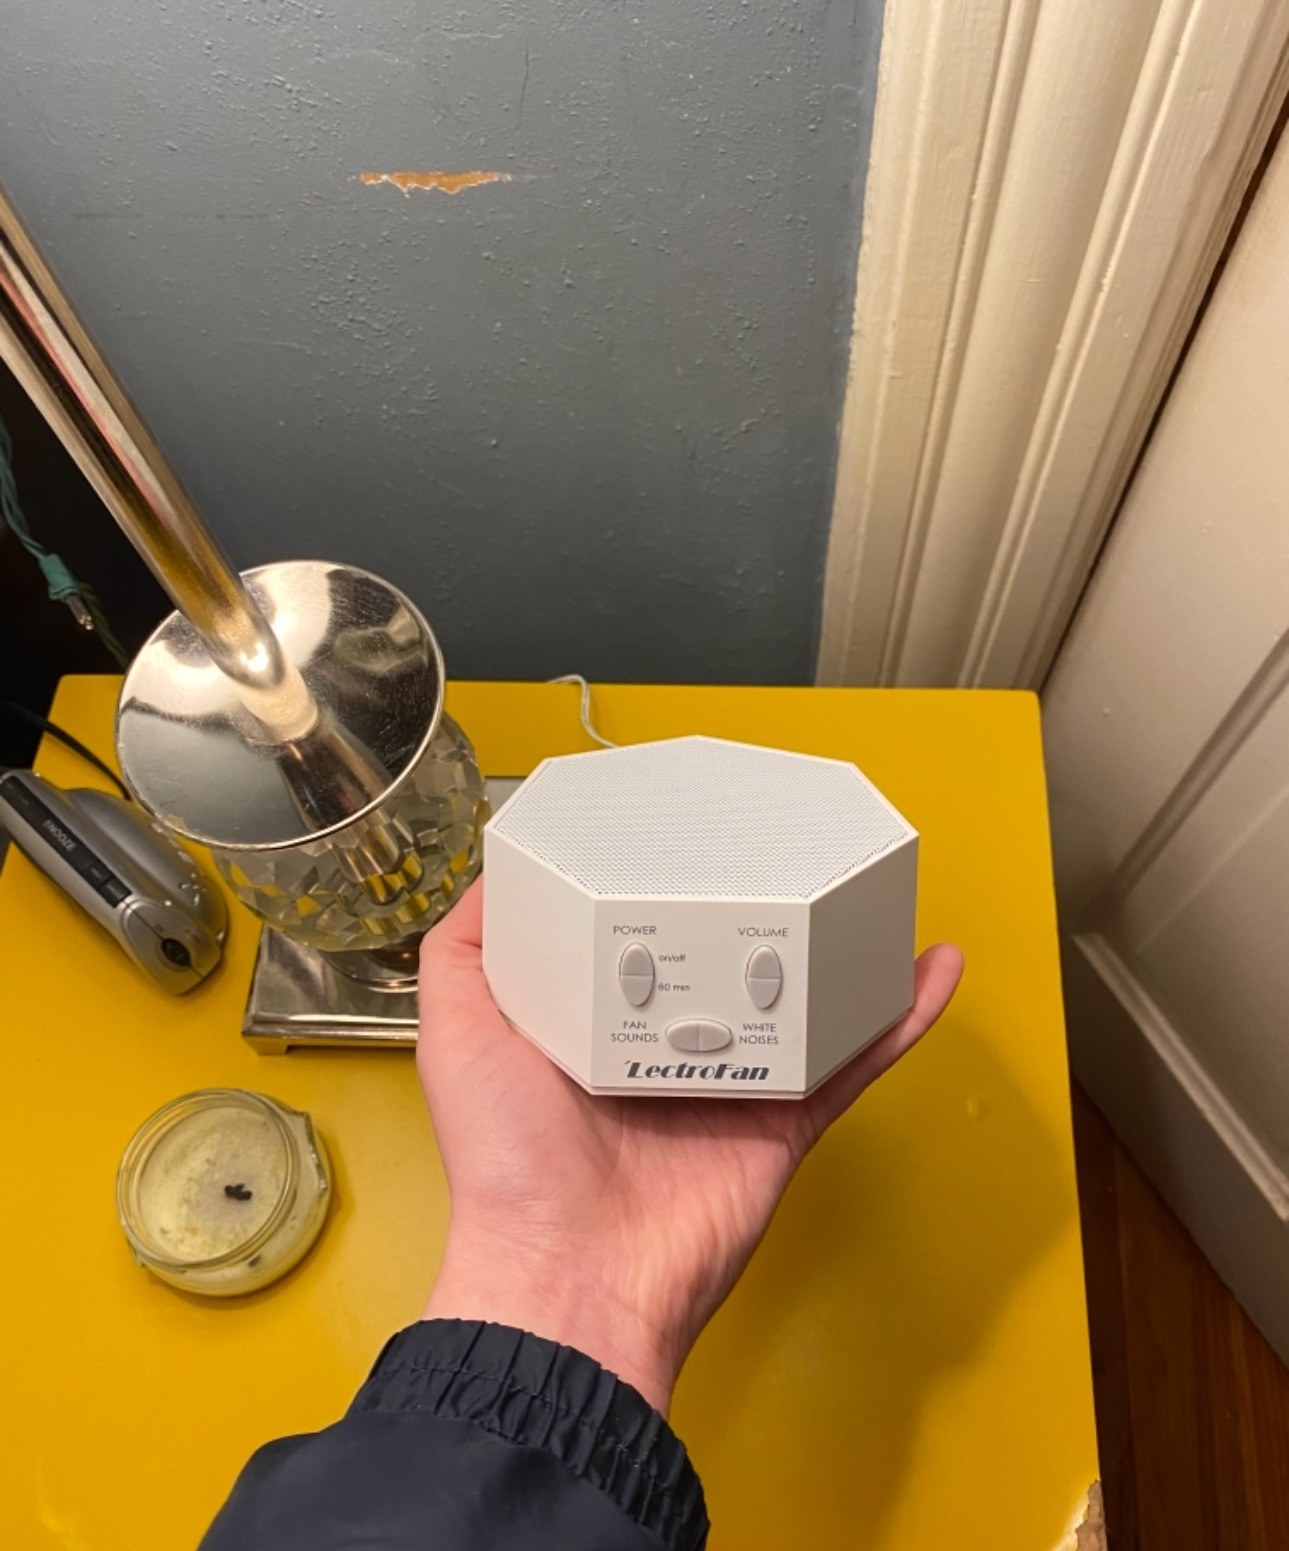 The white noise machine sitting on a side table while Model reads a book